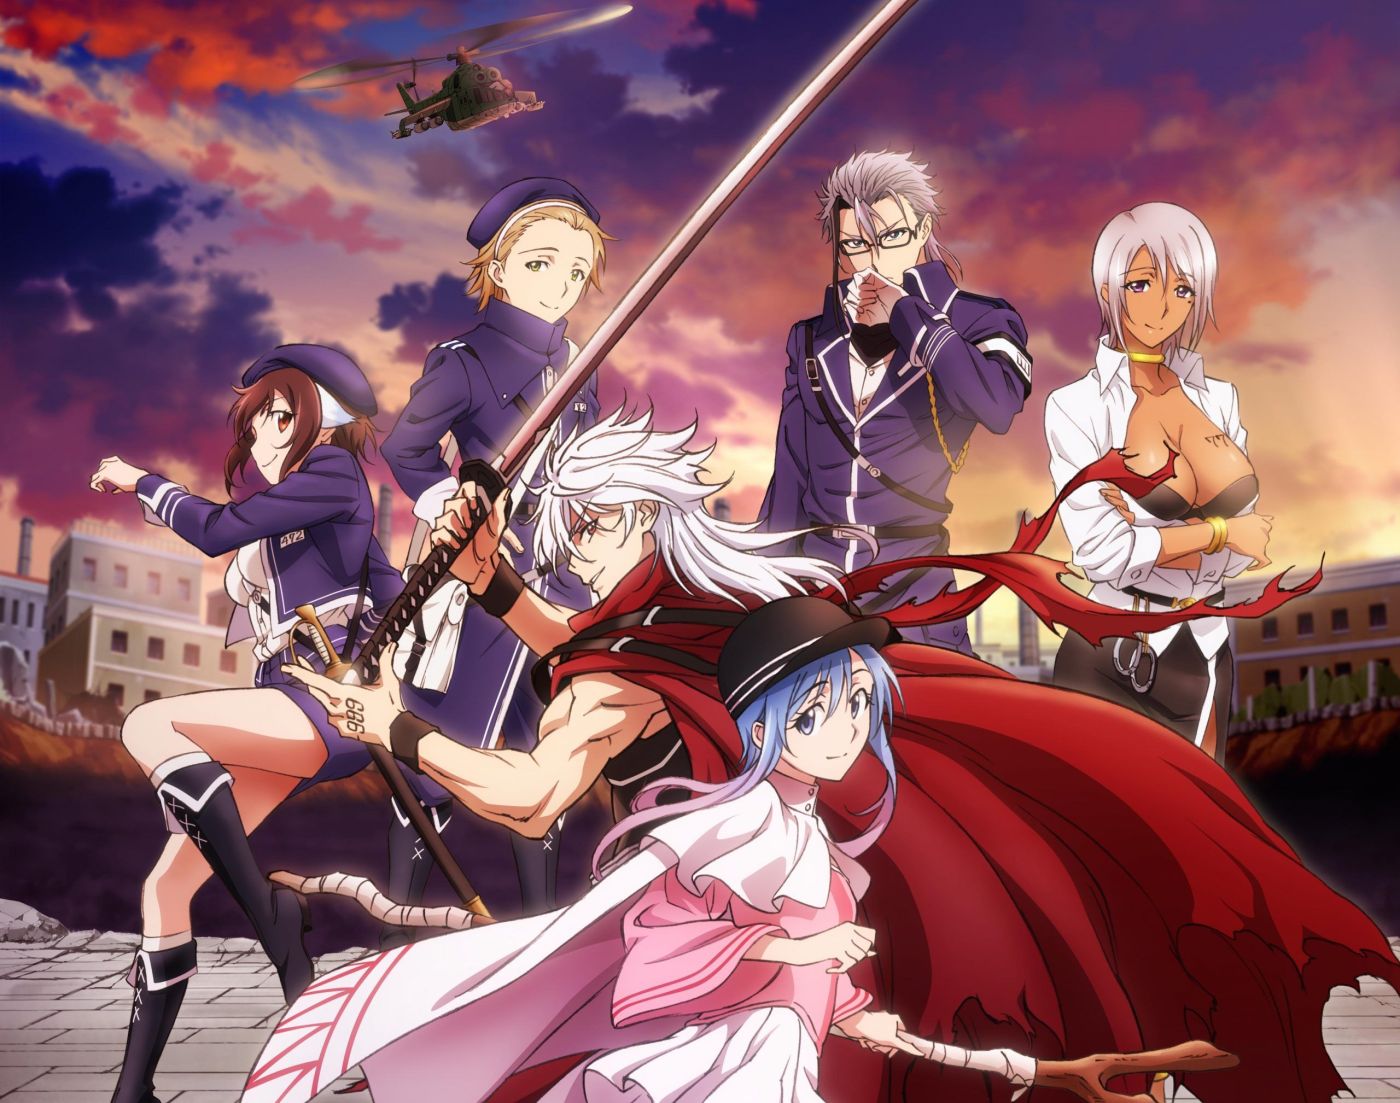 Anime Review 211 Plunderer – TakaCode Reviews